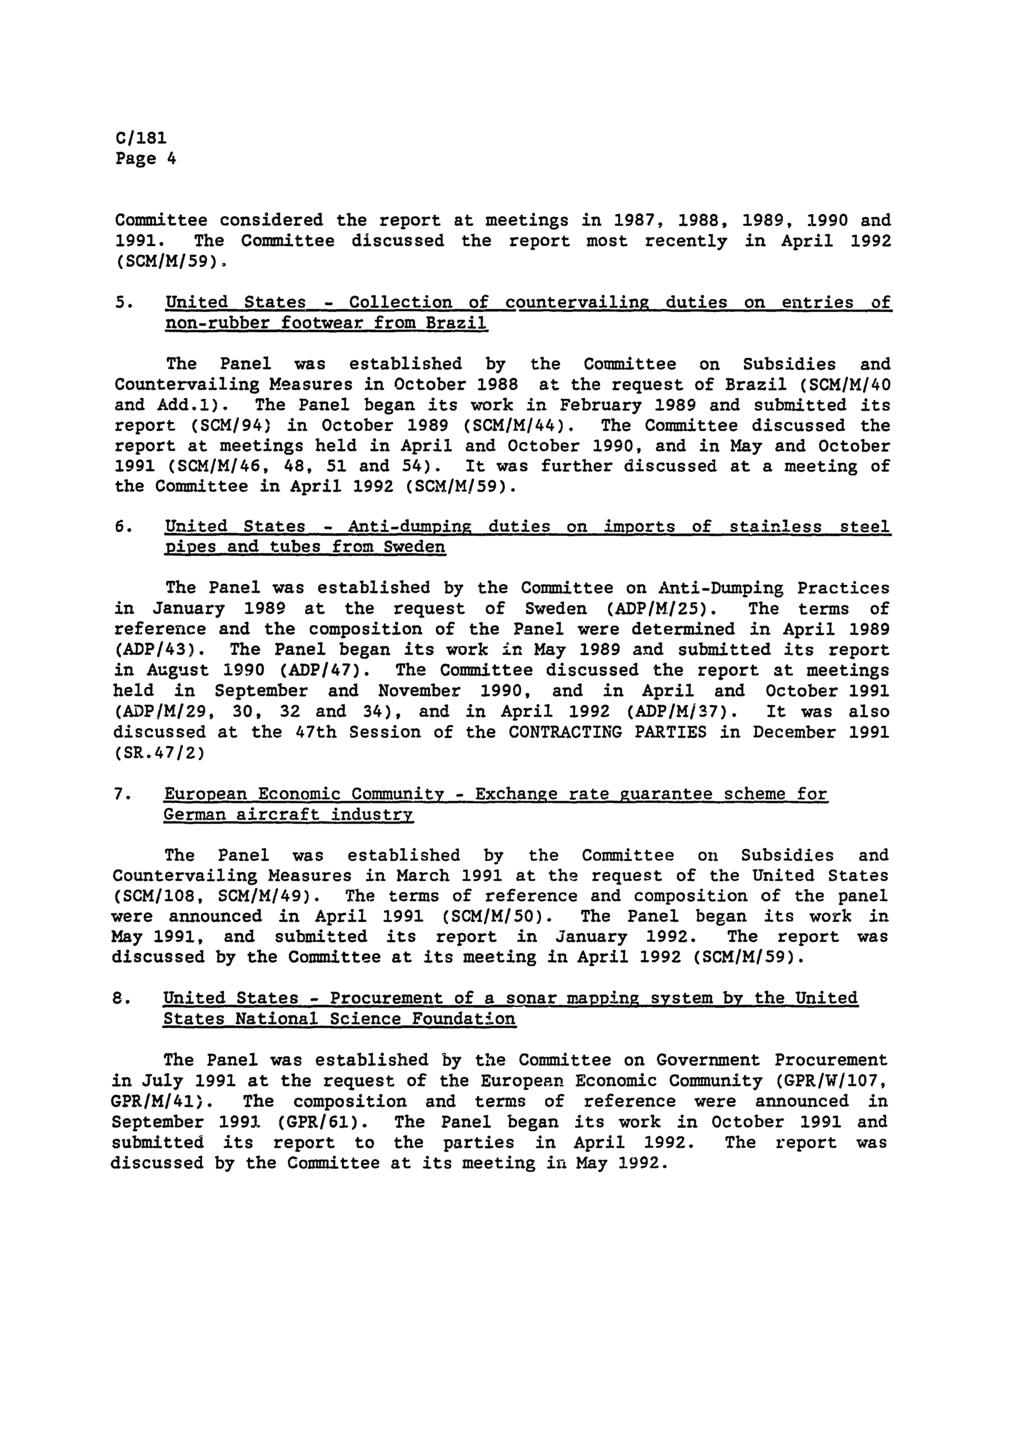 Page 4 Committee considered the report at meetings in 1987, 1988, 1989, 1990 and 1991. The Committee discussed the report most recently in April 1992 (SCM/M/59). 5.